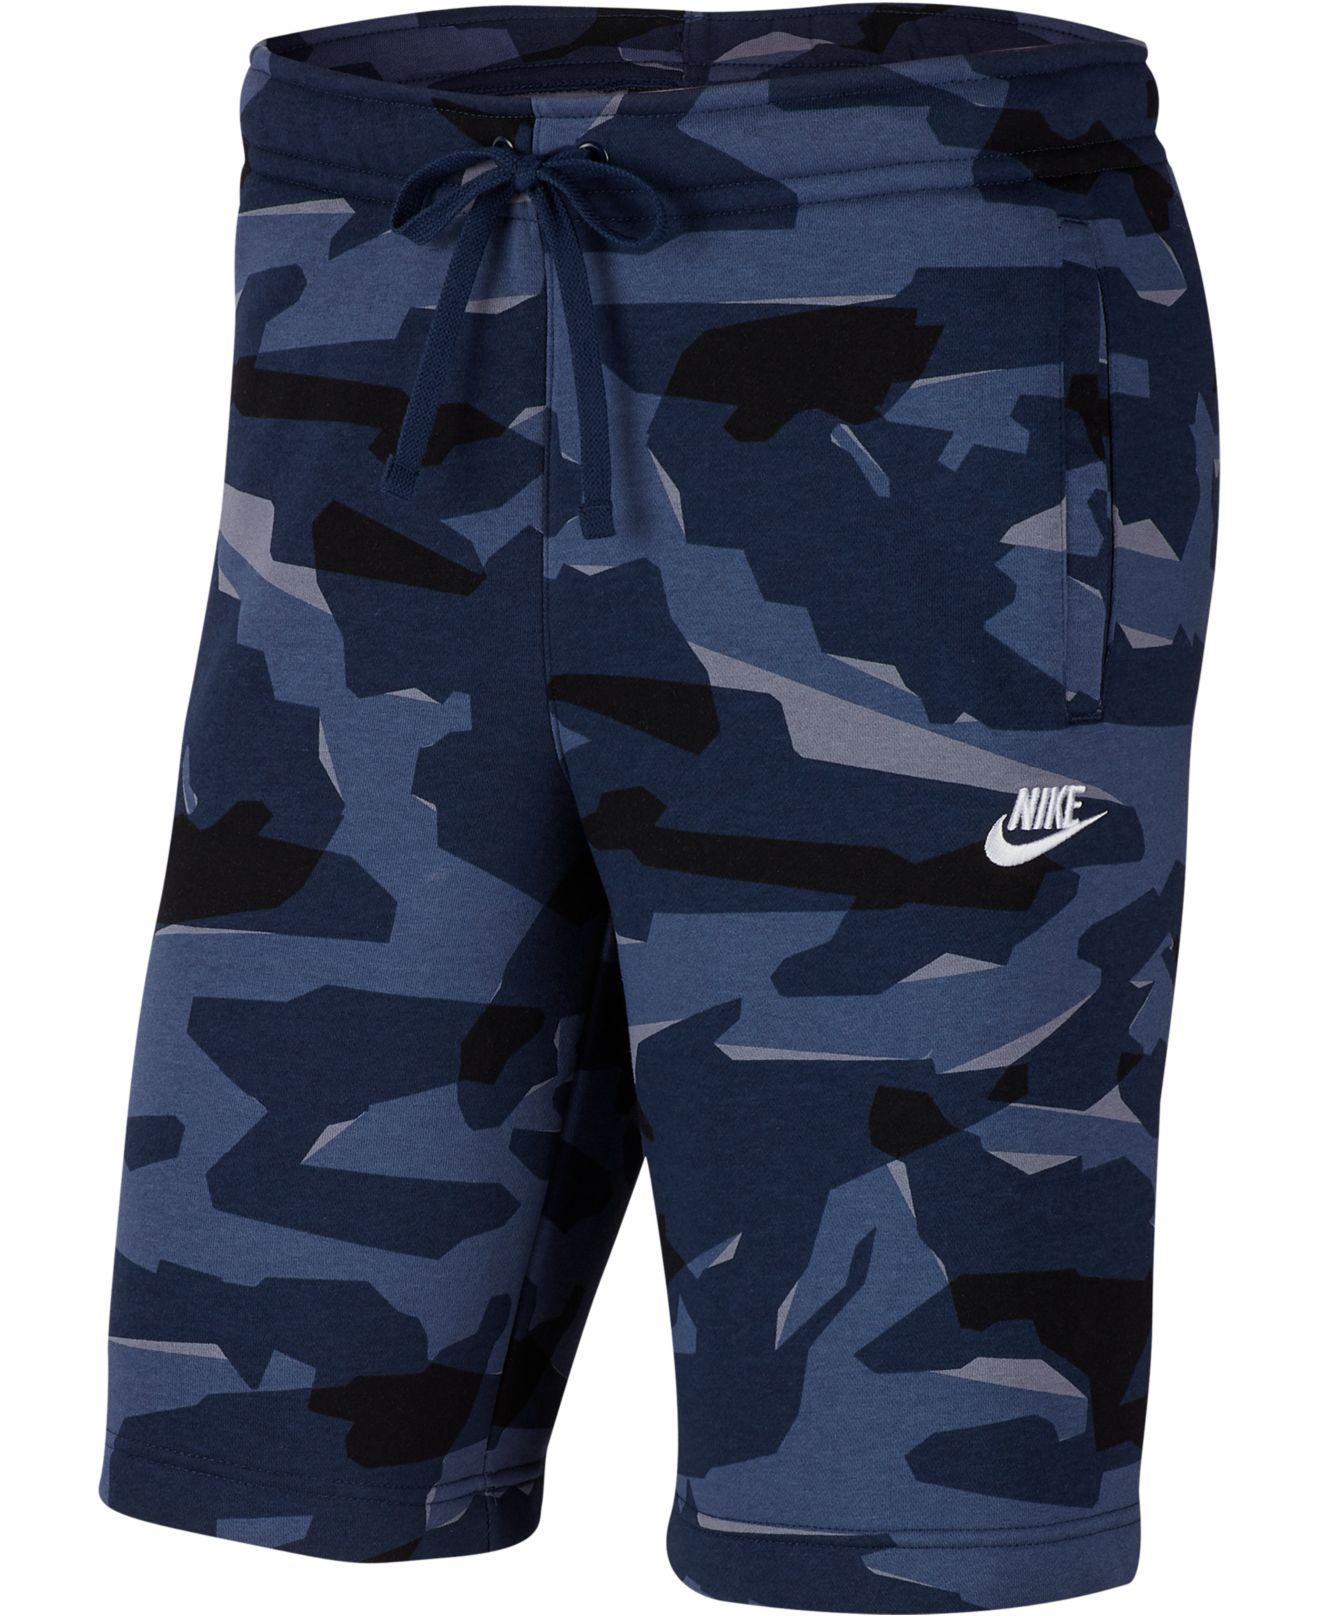 Nike Fleece Club Camouflage - Print Sweat Shorts in Navy/White (Blue) for  Men - Lyst